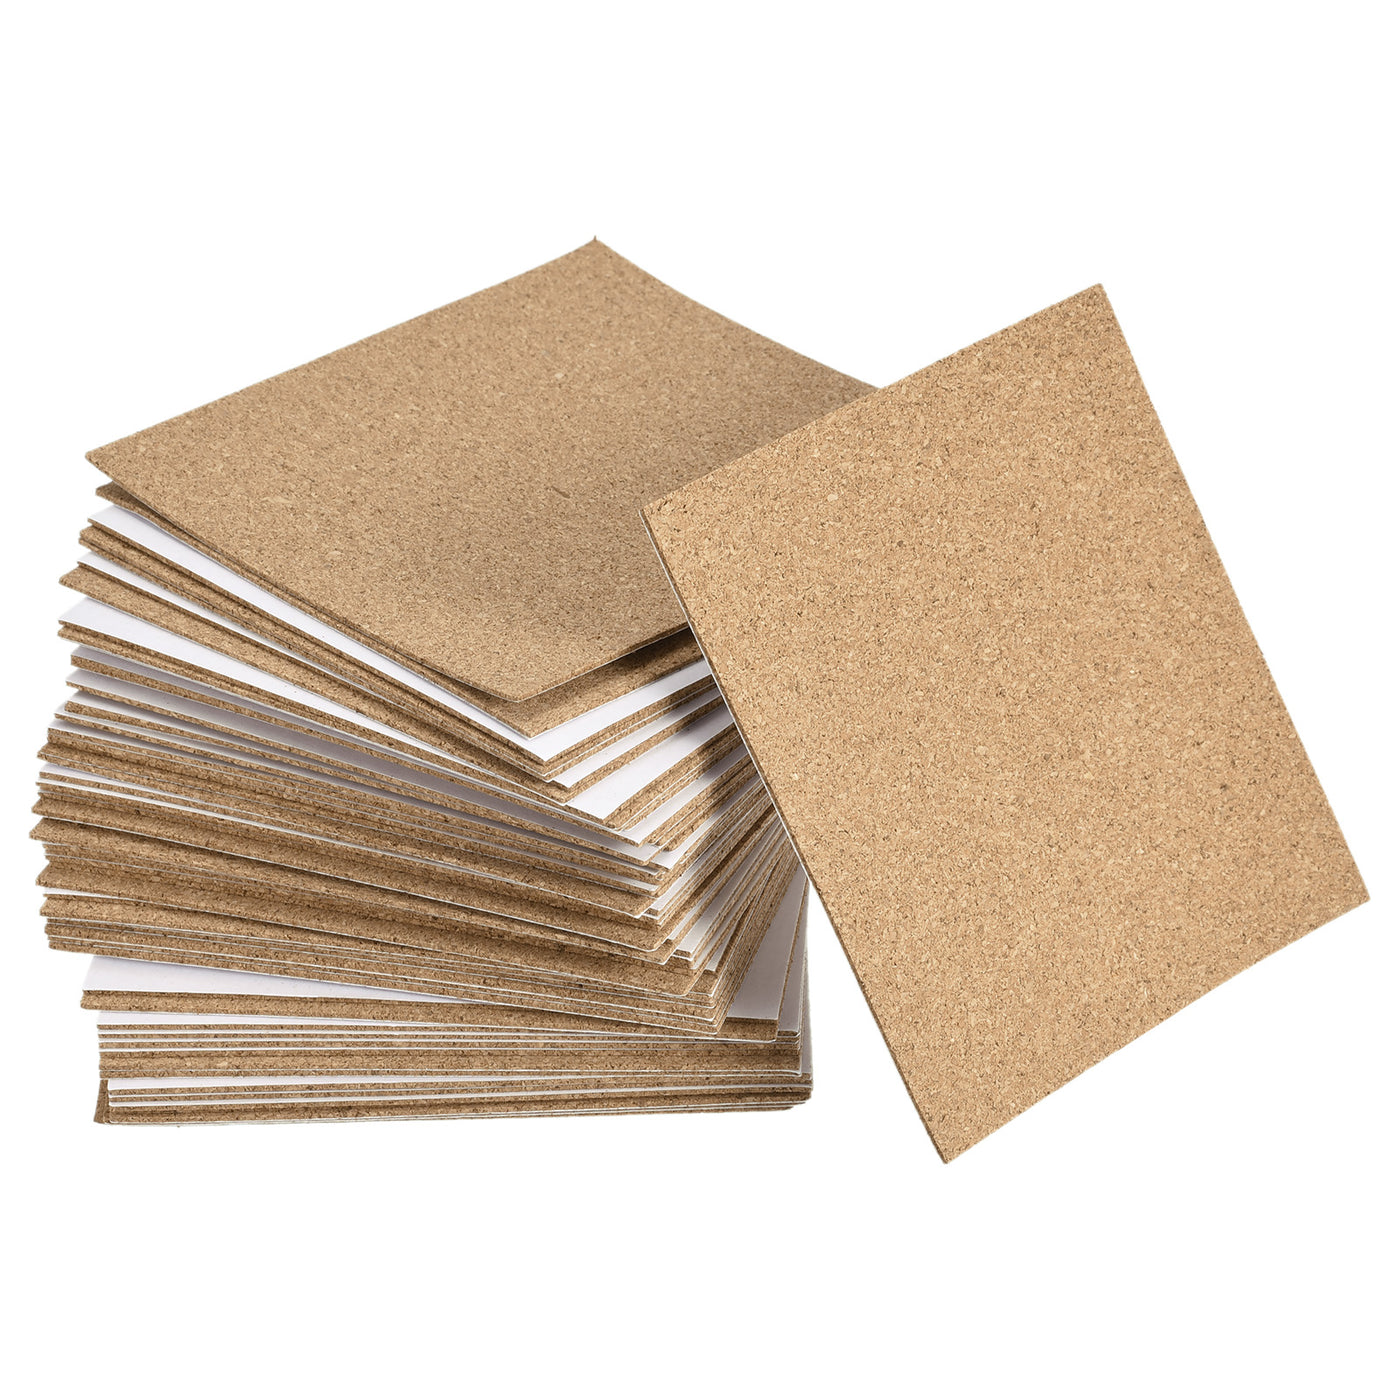 uxcell Uxcell 100x100x1mm Square Coasters Cork Cup Mat Pad Adhesive Backed 60pcs